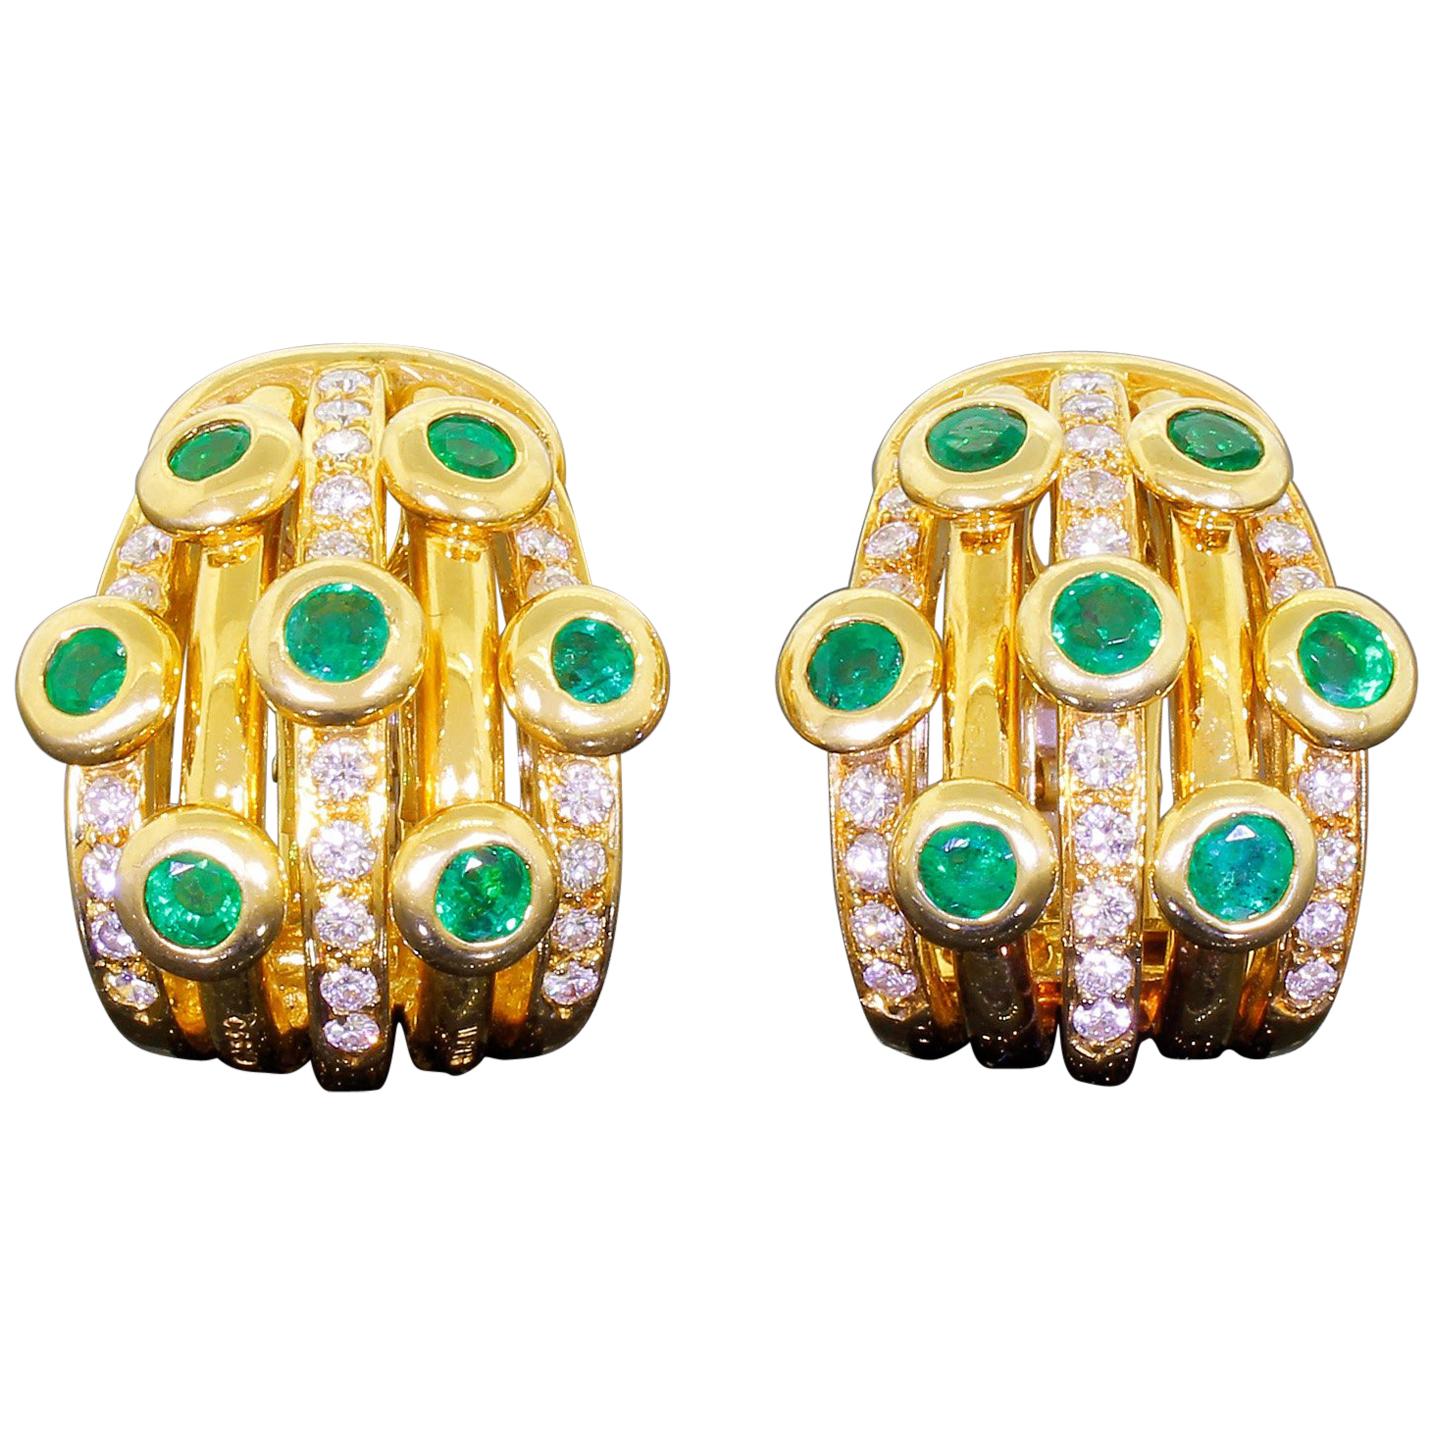 Adler 18k Gold Diamond Emerald Earrings Serail 1990 Classic Couture Clip On 26G For Sale